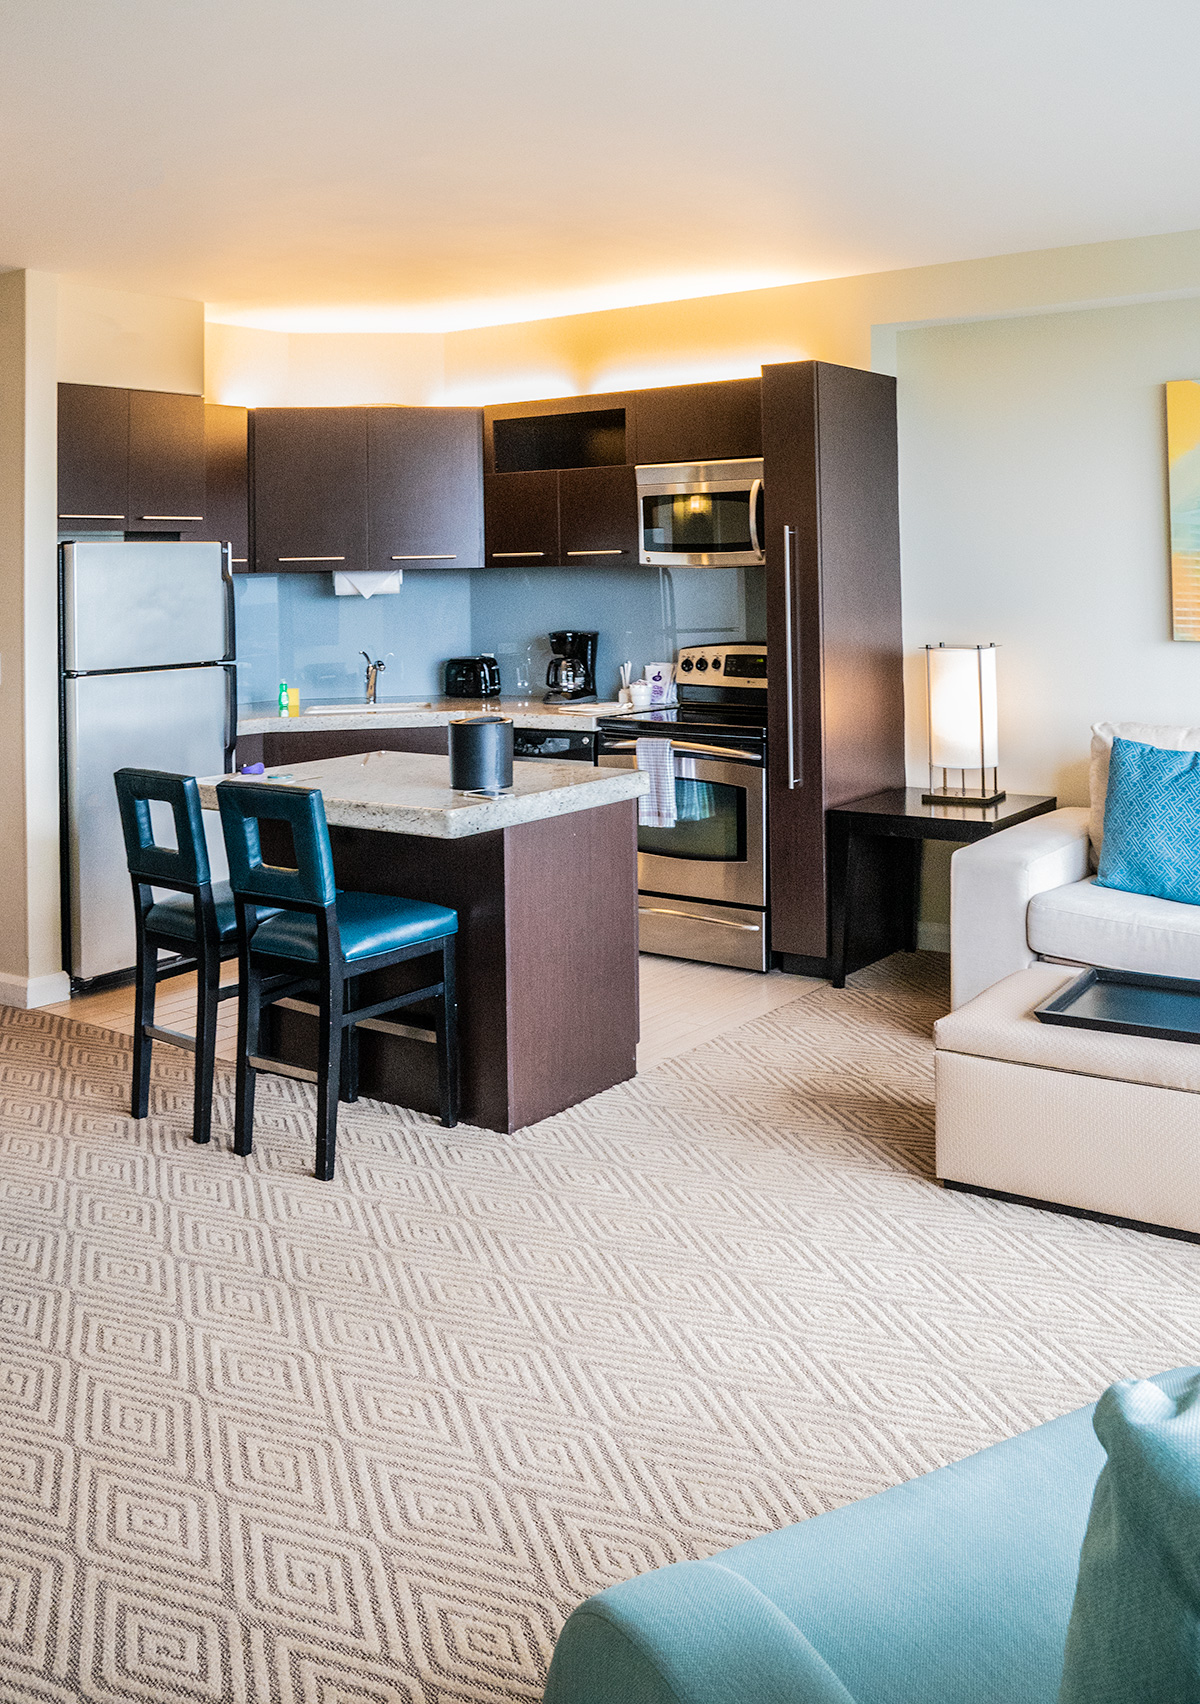 What It's Like To Stay at Disney's Contemporary Resort